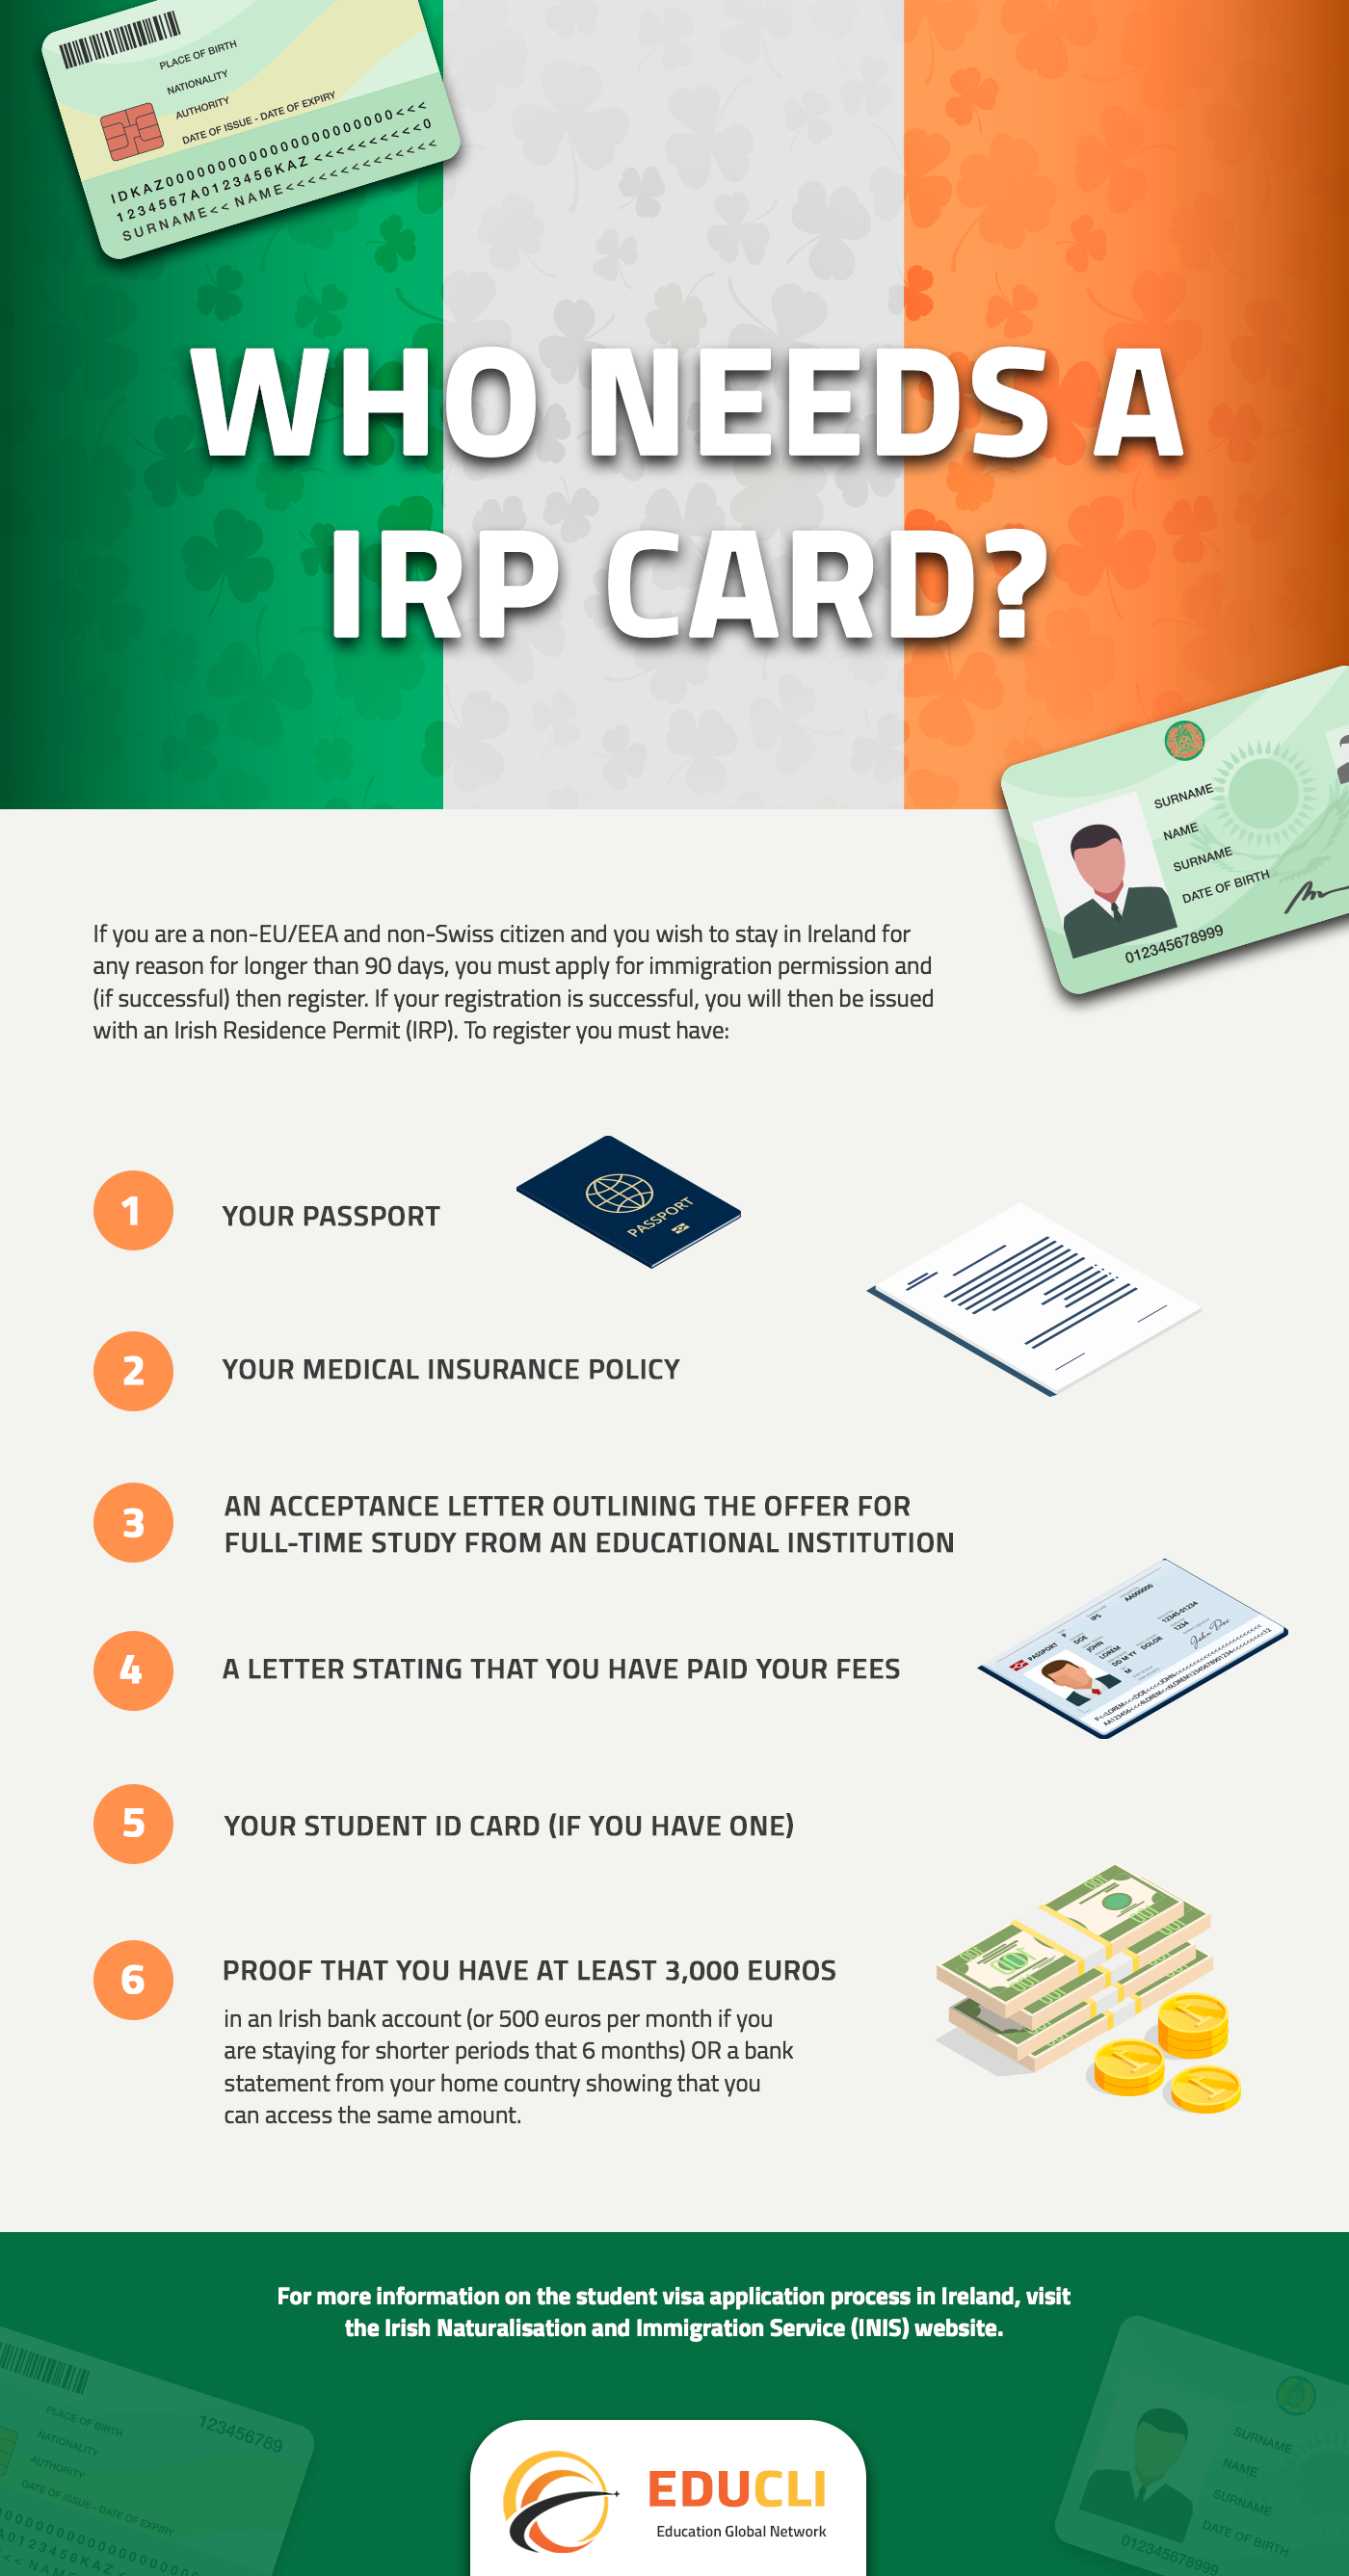 WHO NEEDS A IRP CARD? - IRELAND